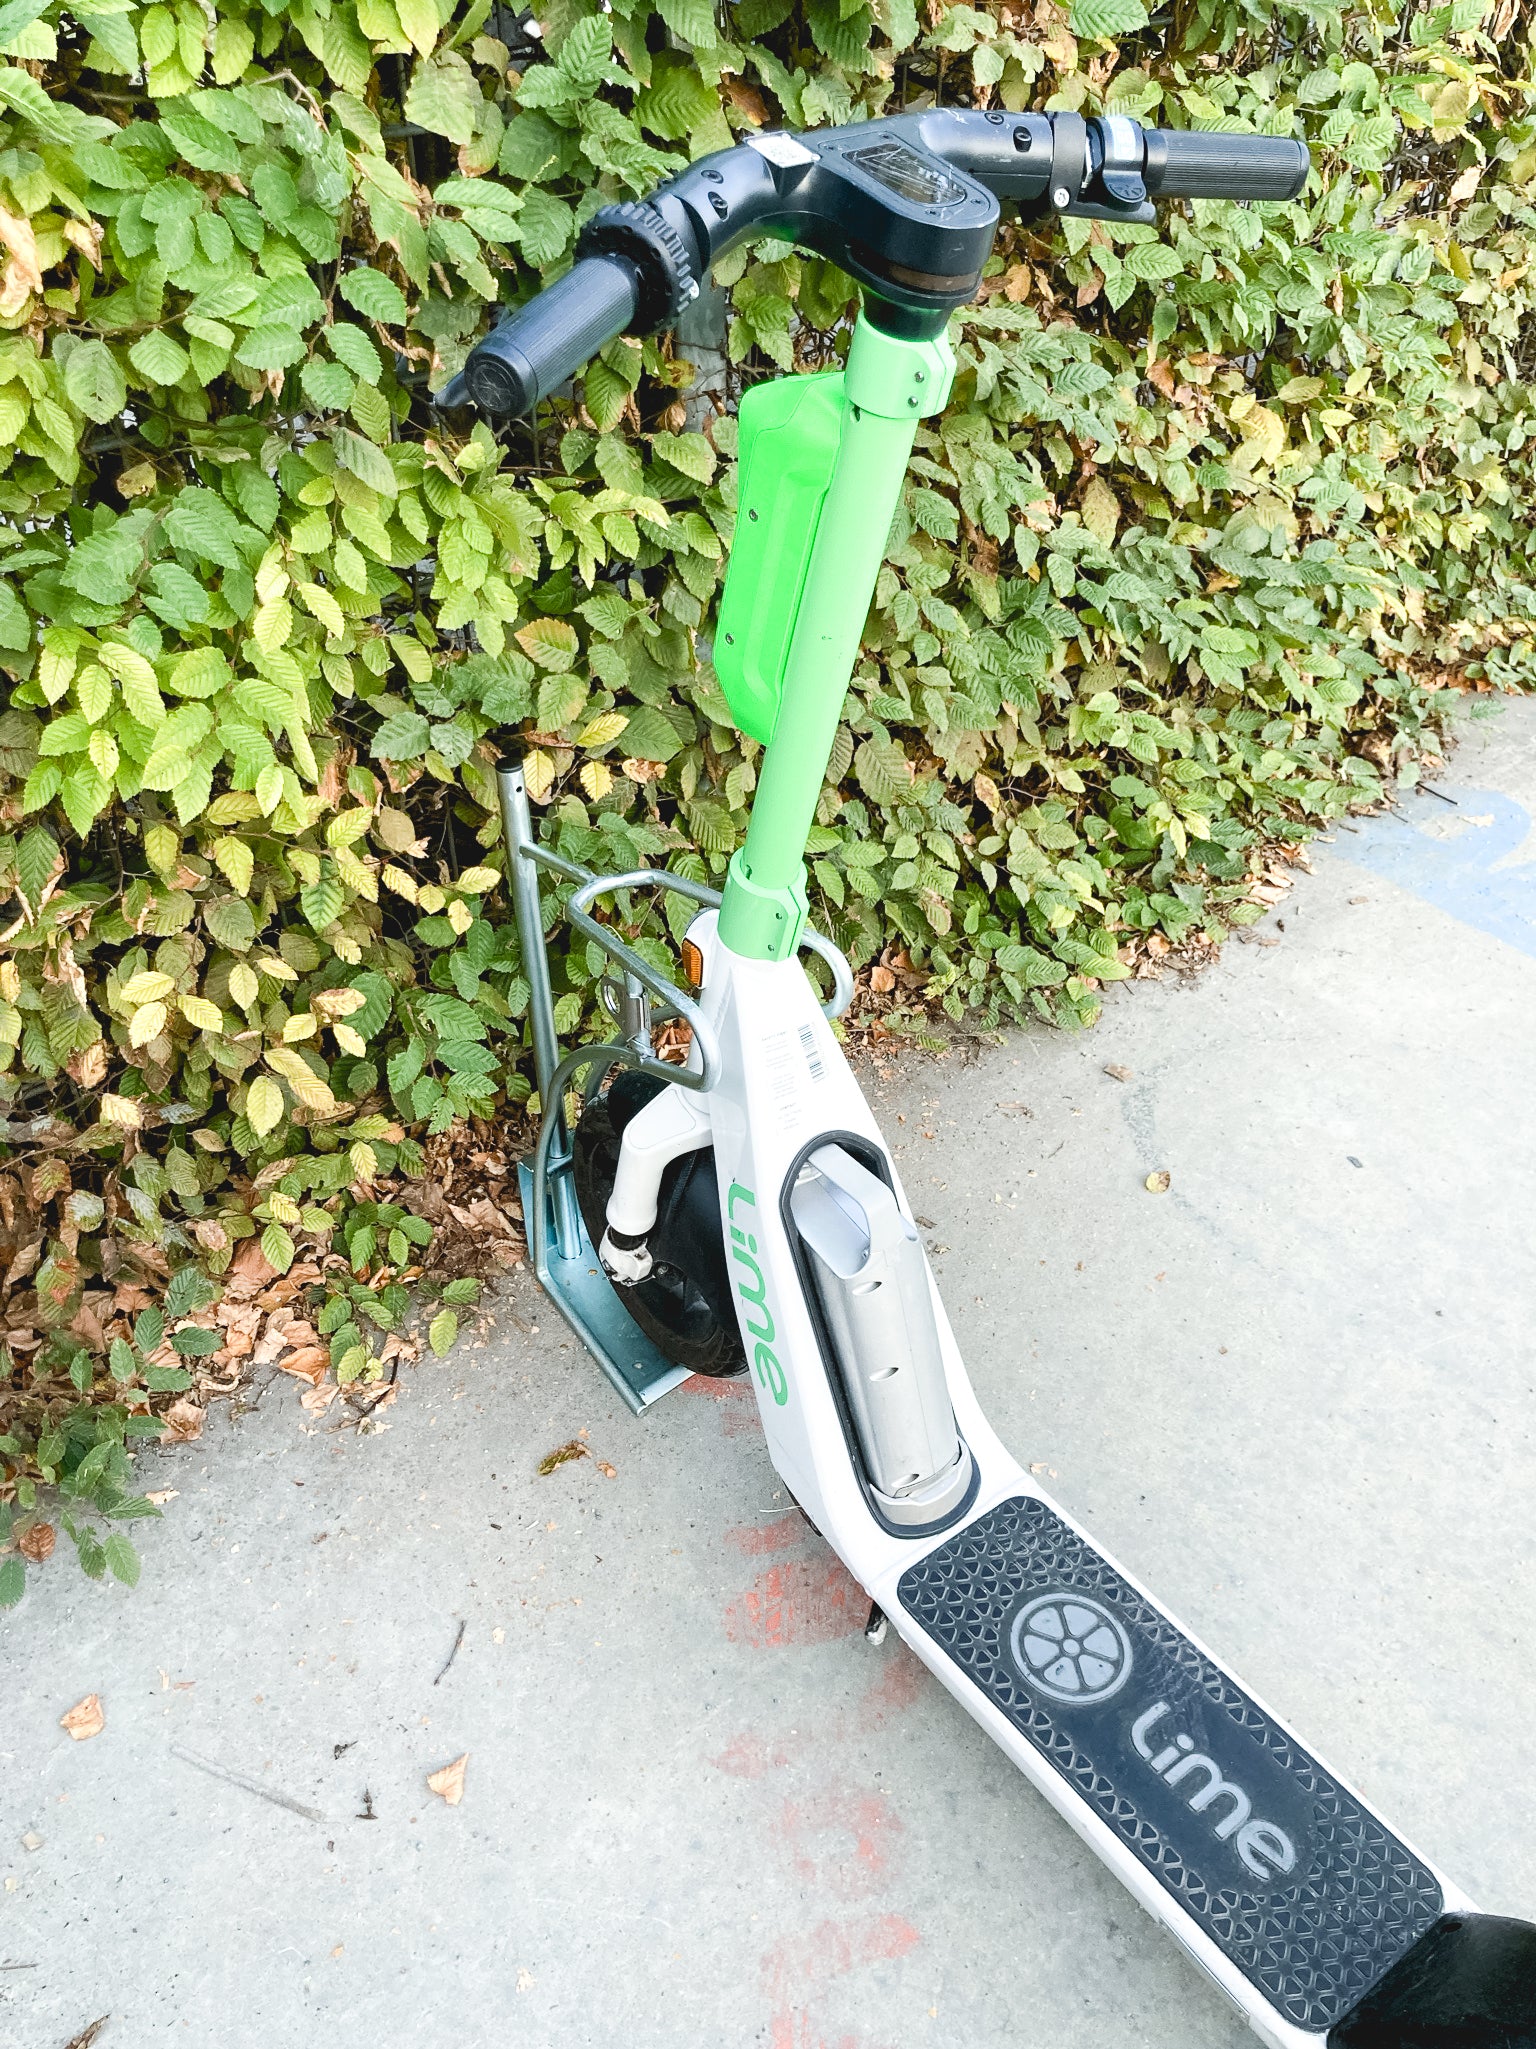 CLEDO - scooter and bicycle stand with any number of lockable parking spaces for e-scooters, kick scooters and bicycles